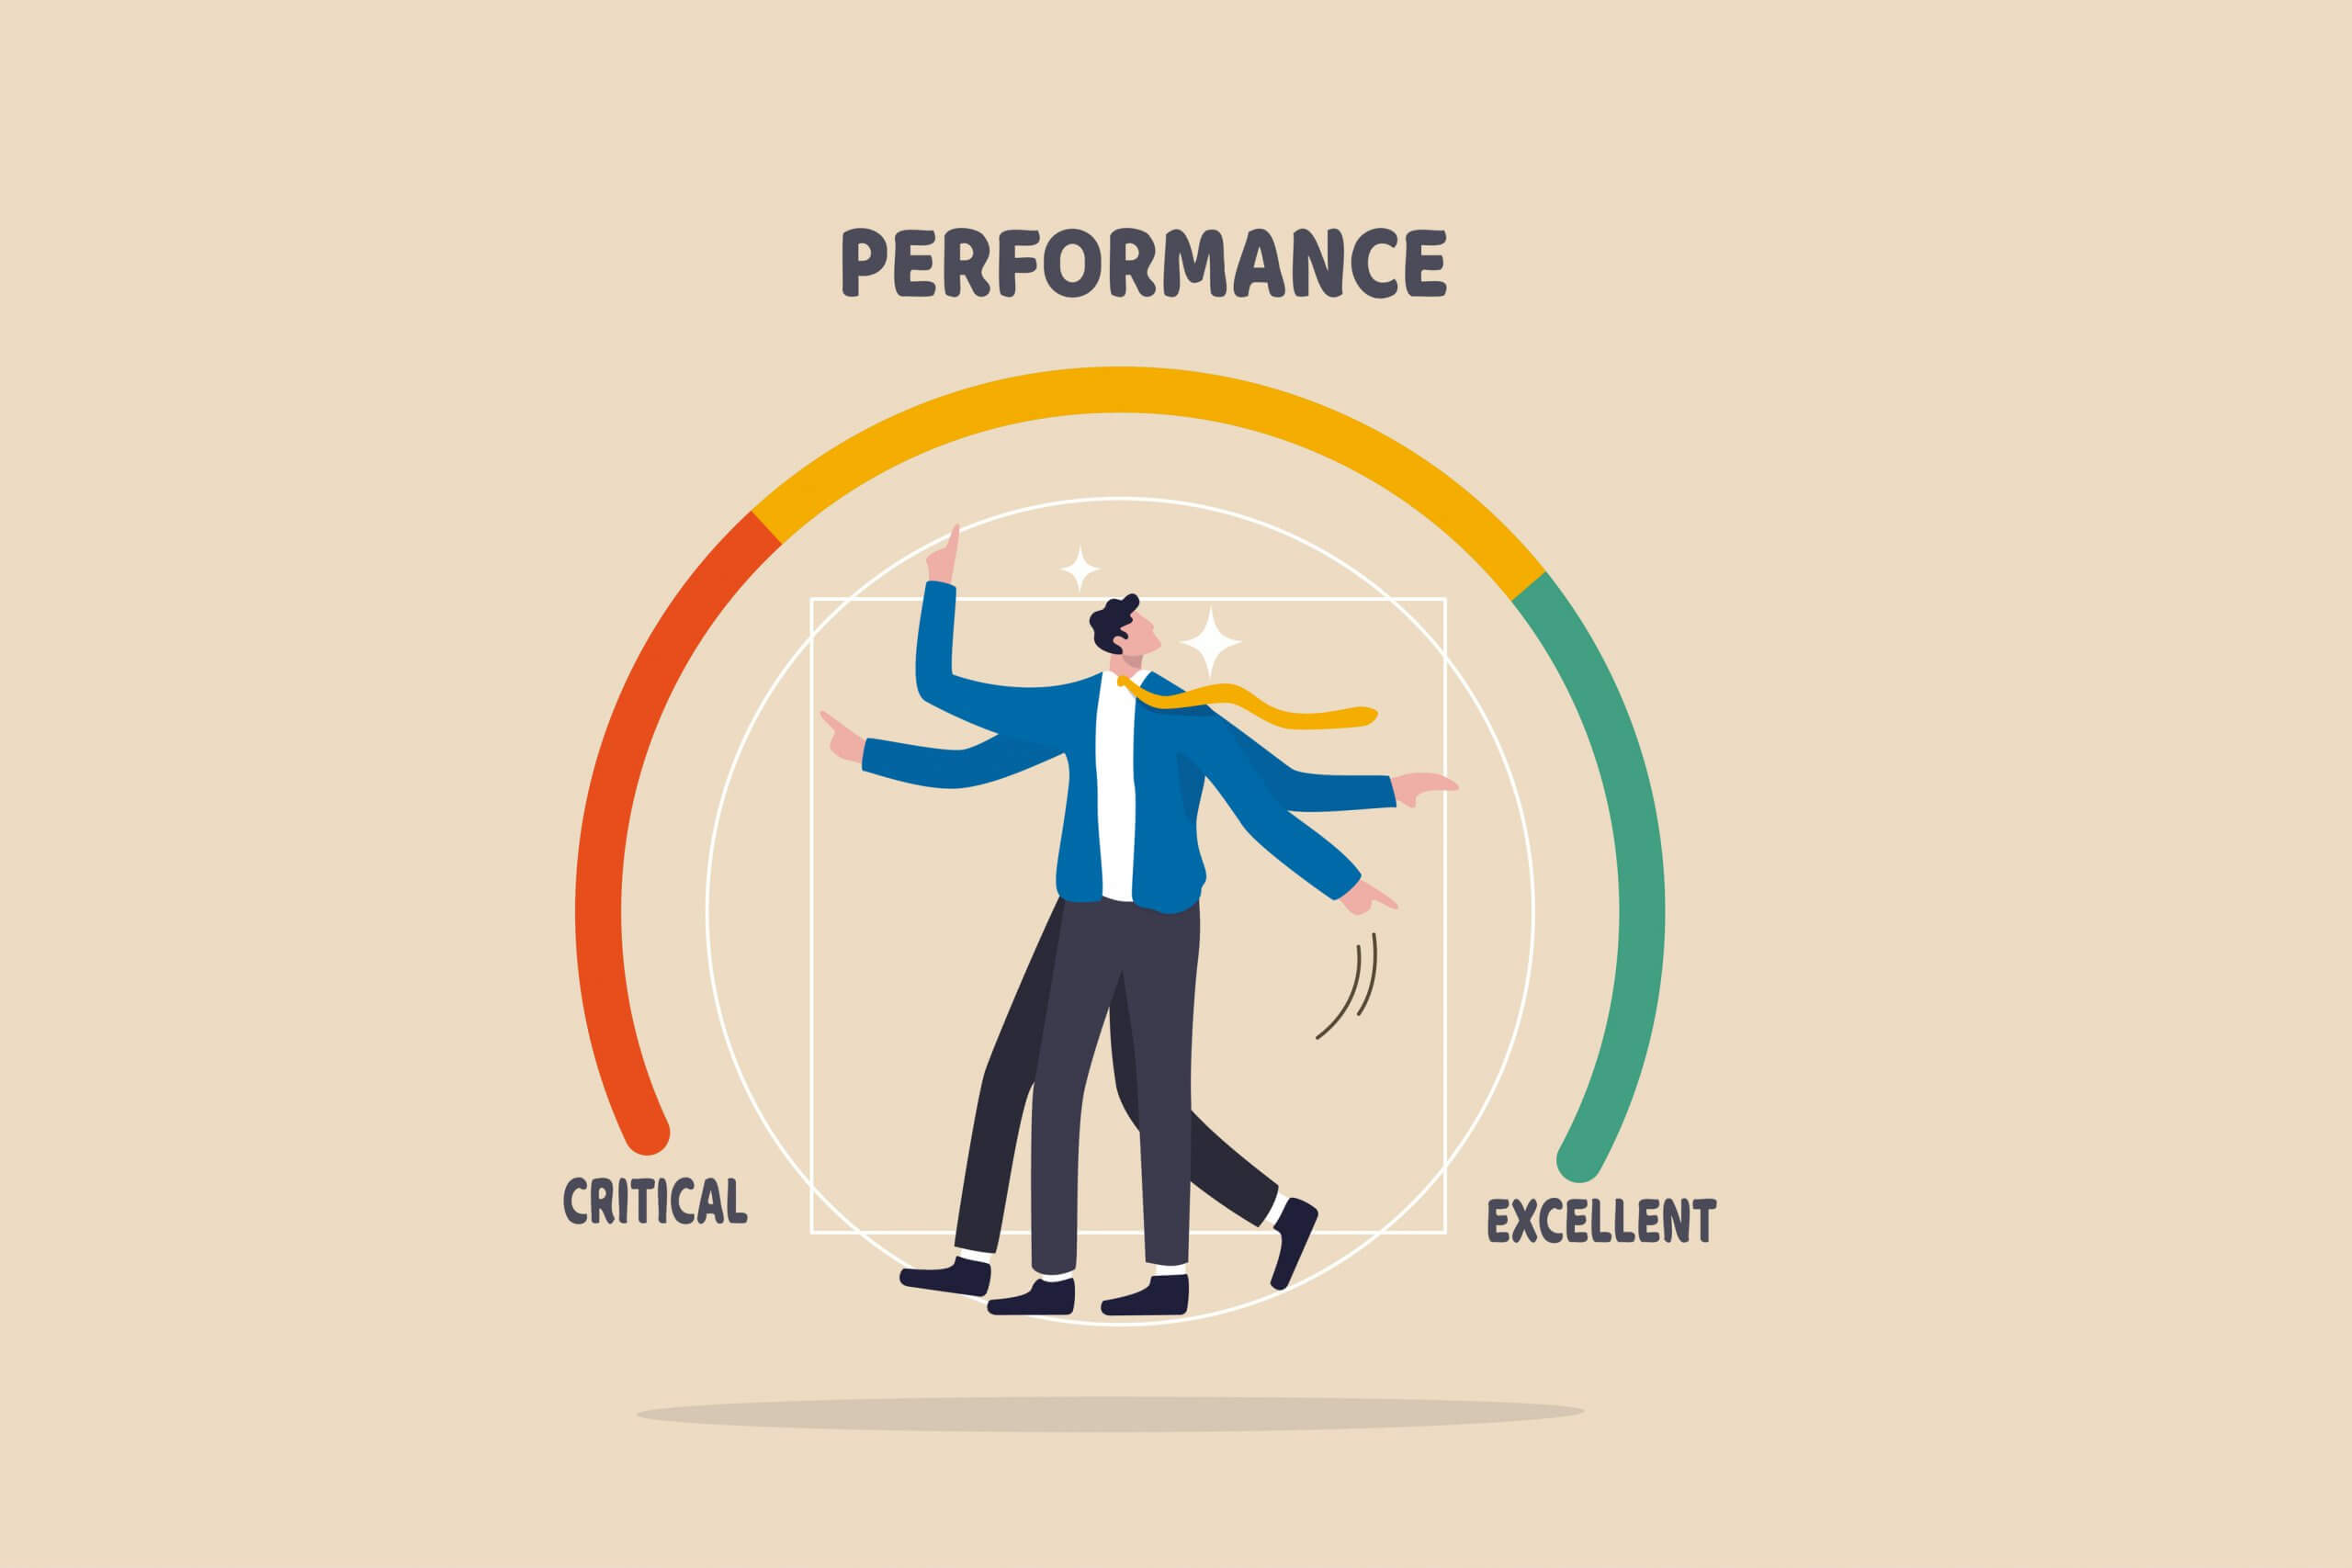 Can Performance Management Improve Businesses?